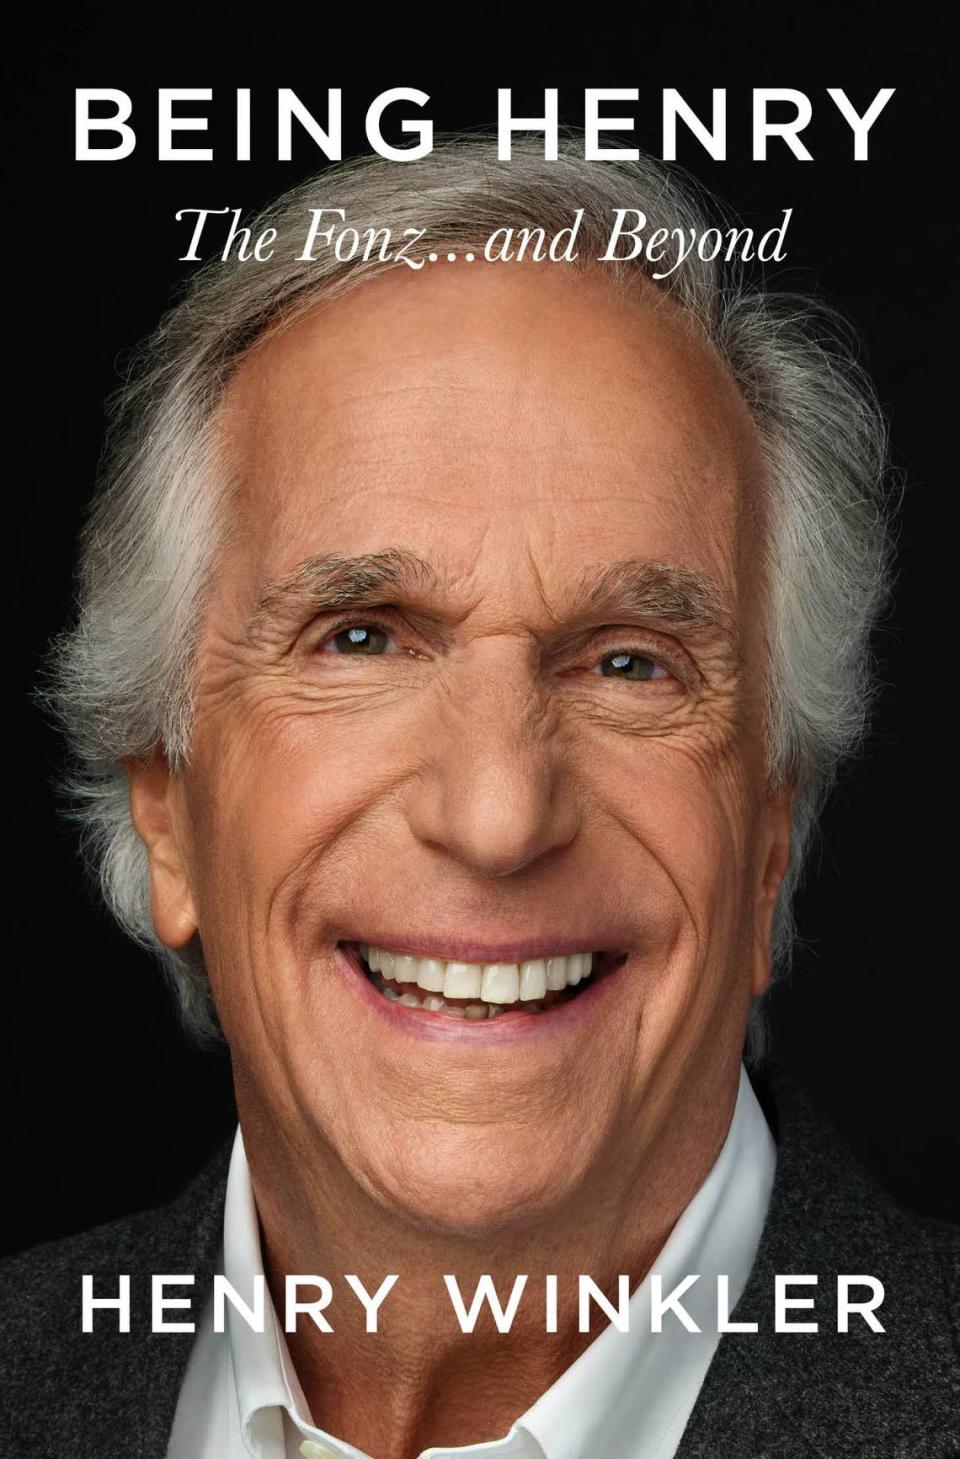 Henry Winkler’s memoir “Being Henry: The Fonz ... And Beyond” releases Oct. 31, 2023.